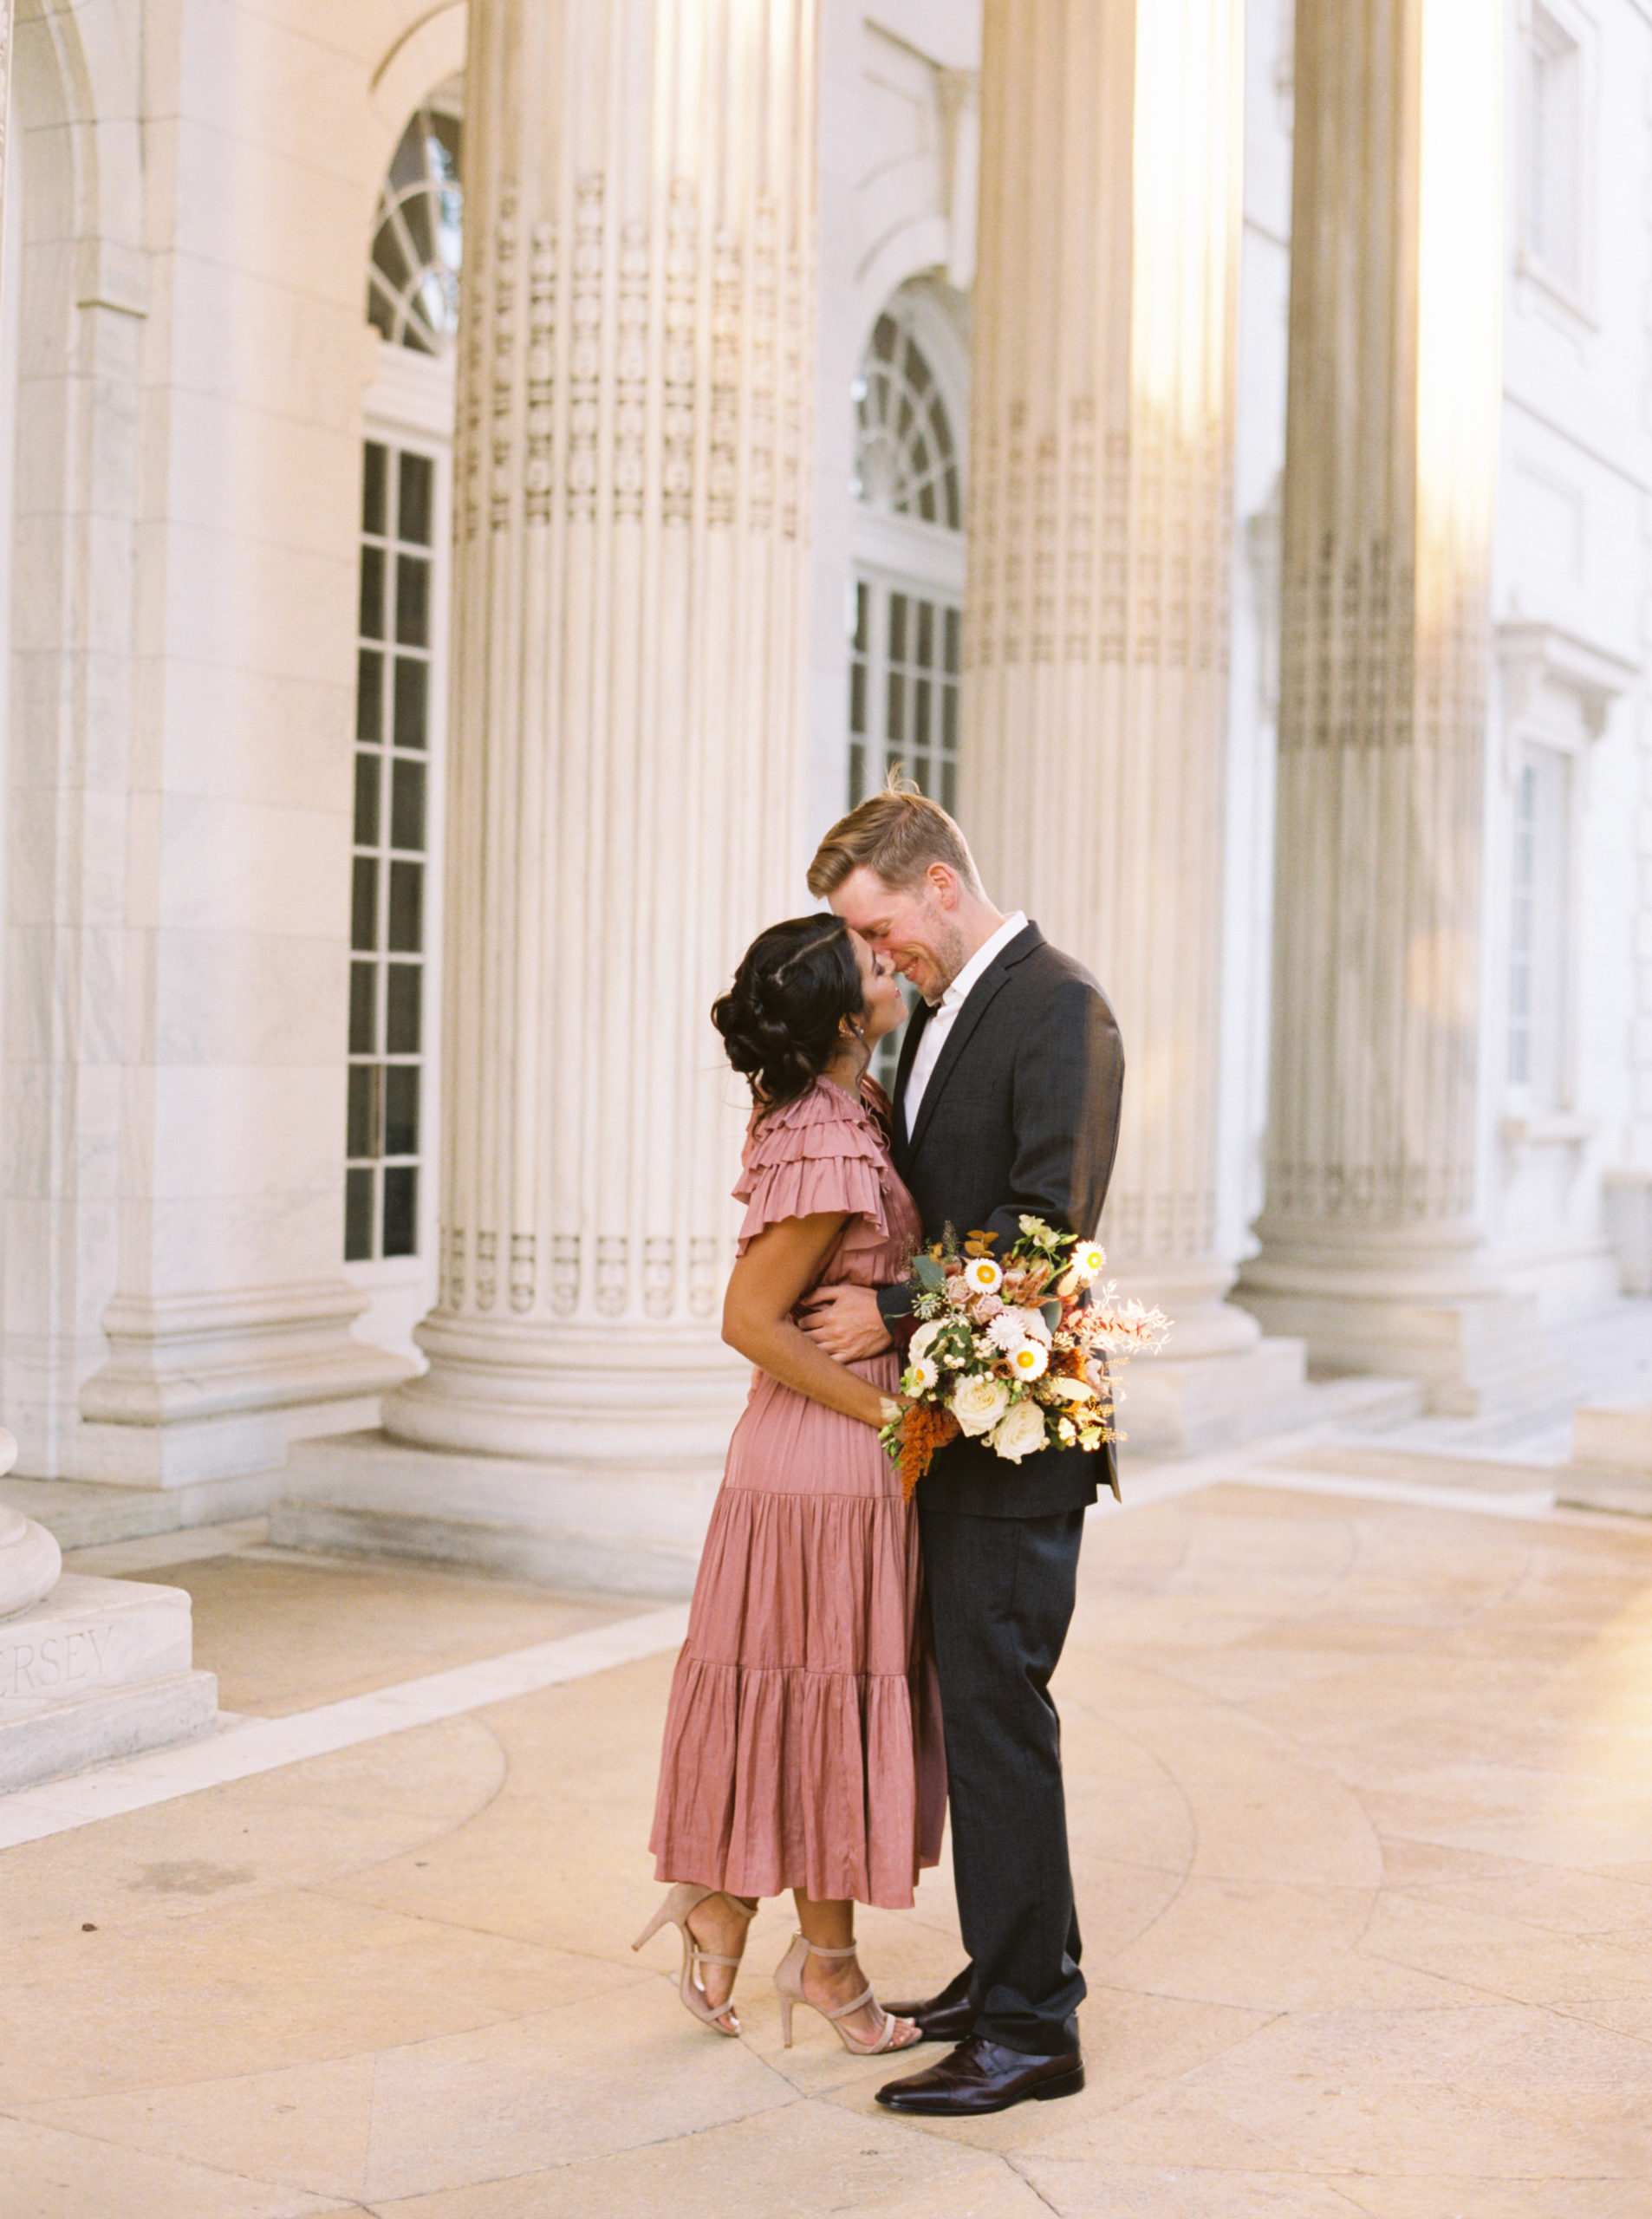 Groom to be kisses bride to be on her forehead as they celebrate their engagement session at at the Daughters of the American Revolution in Washington, DC photographed by Victoria Heer, luxury wedding photographer.